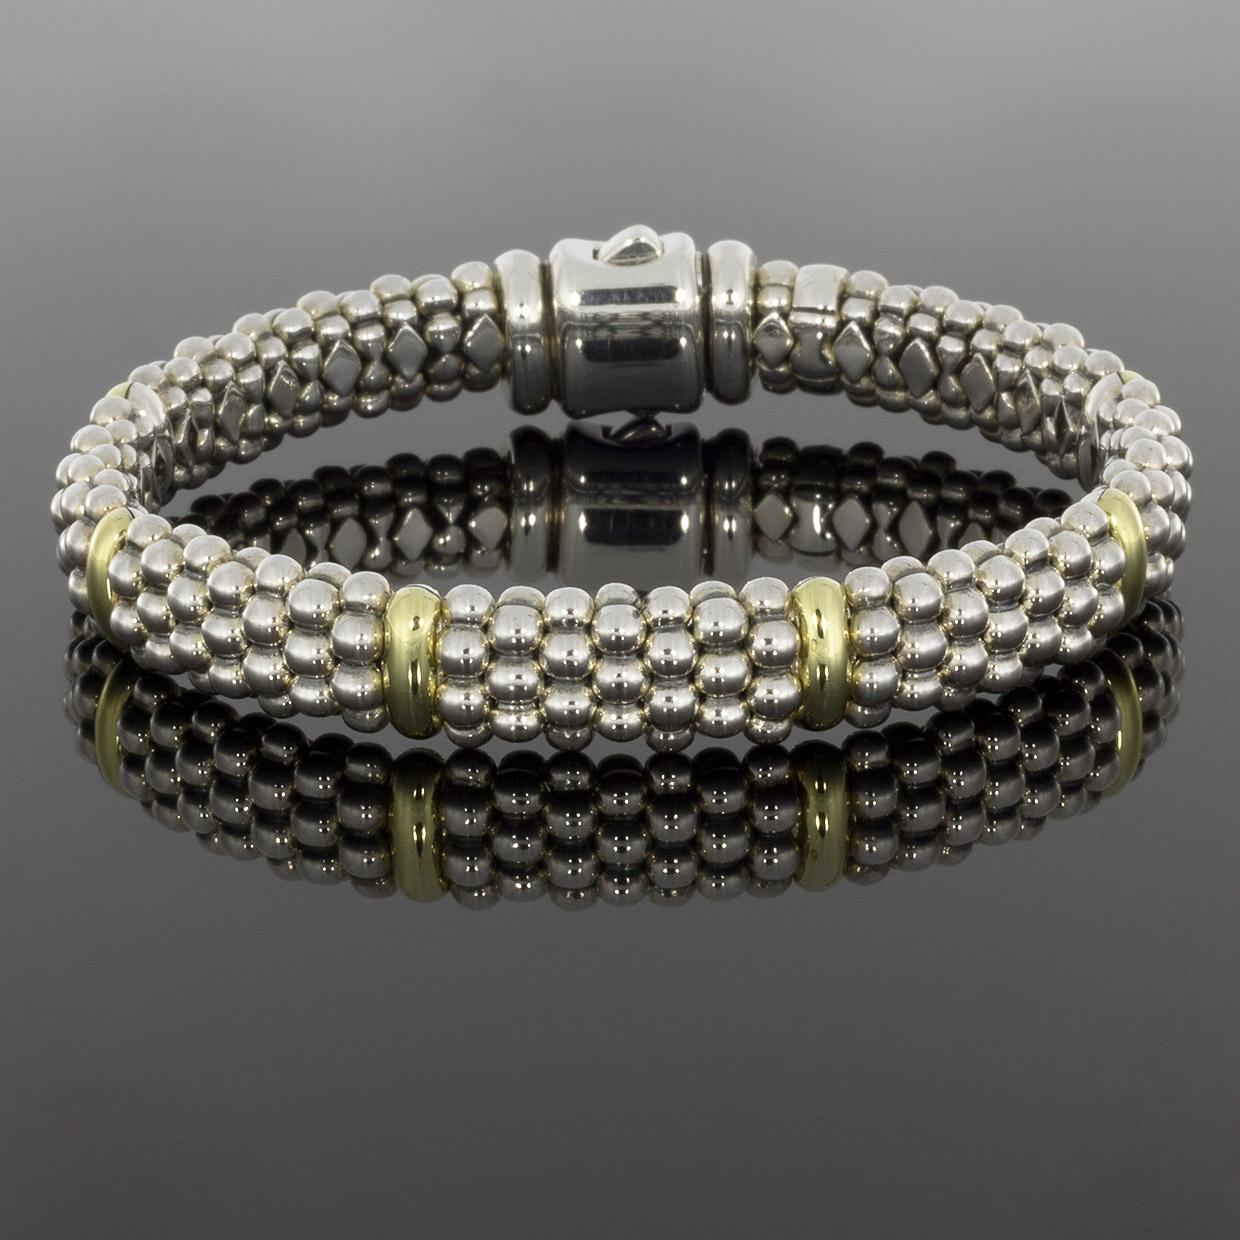 Women's Lagos Signature Caviar Gold and Silver Beaded Bracelets